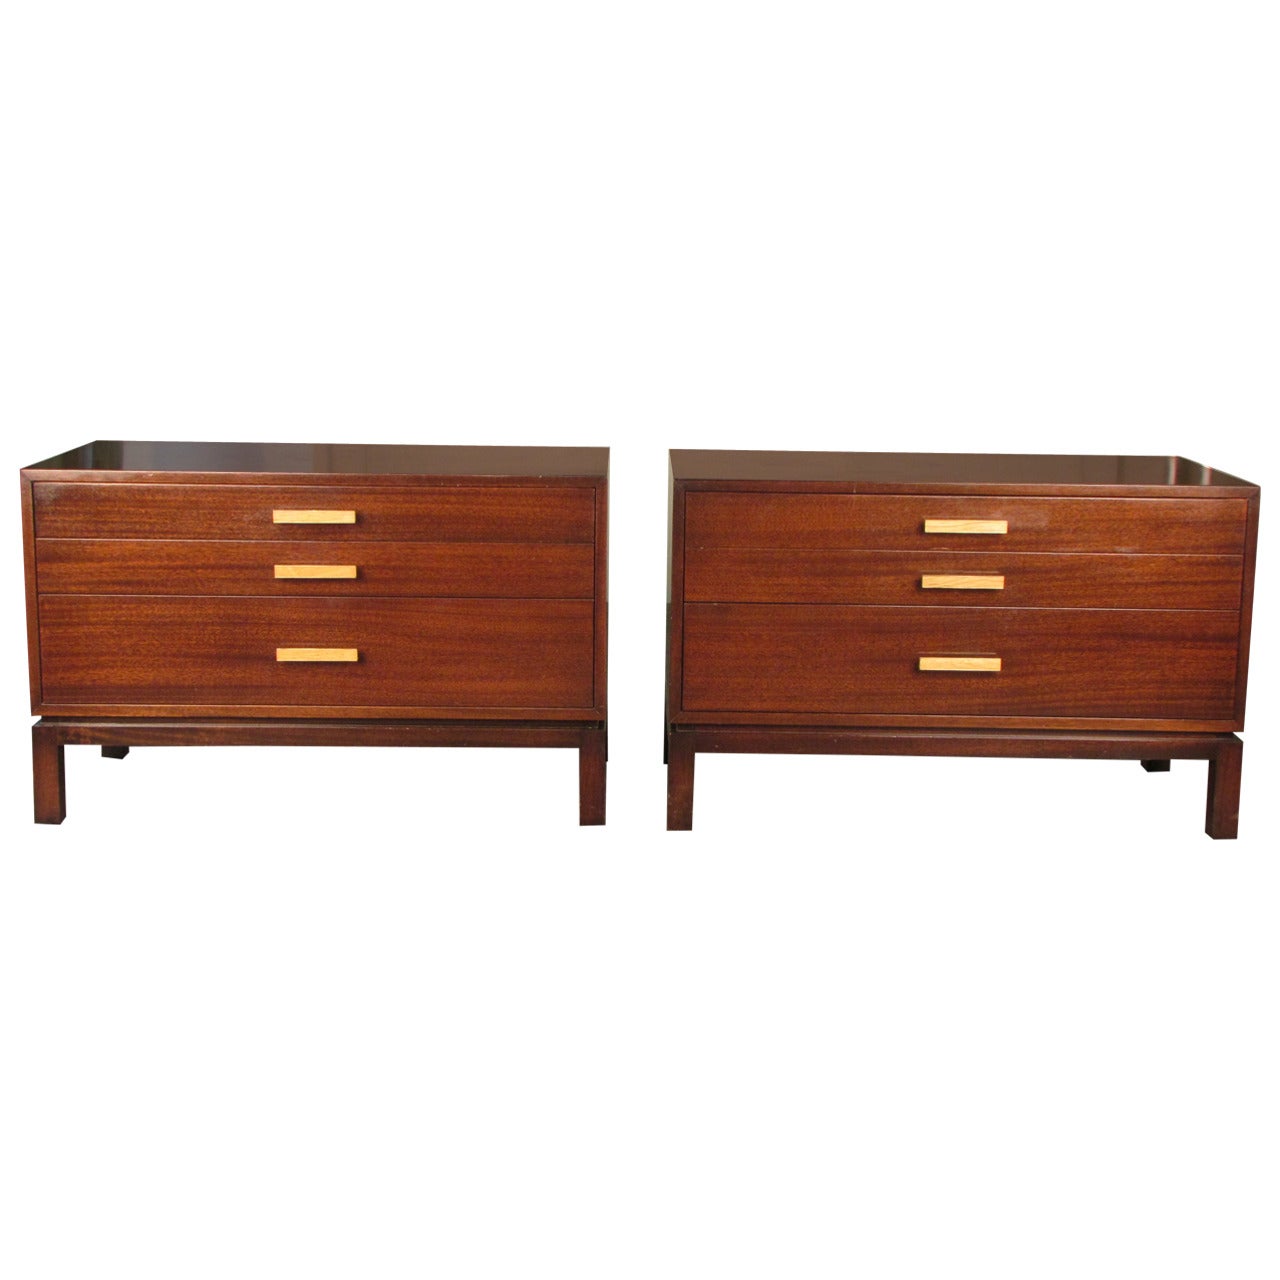 Custom Ribbon Mahogany End Tables or Nightstands by Harvey Probber Studio, 1965